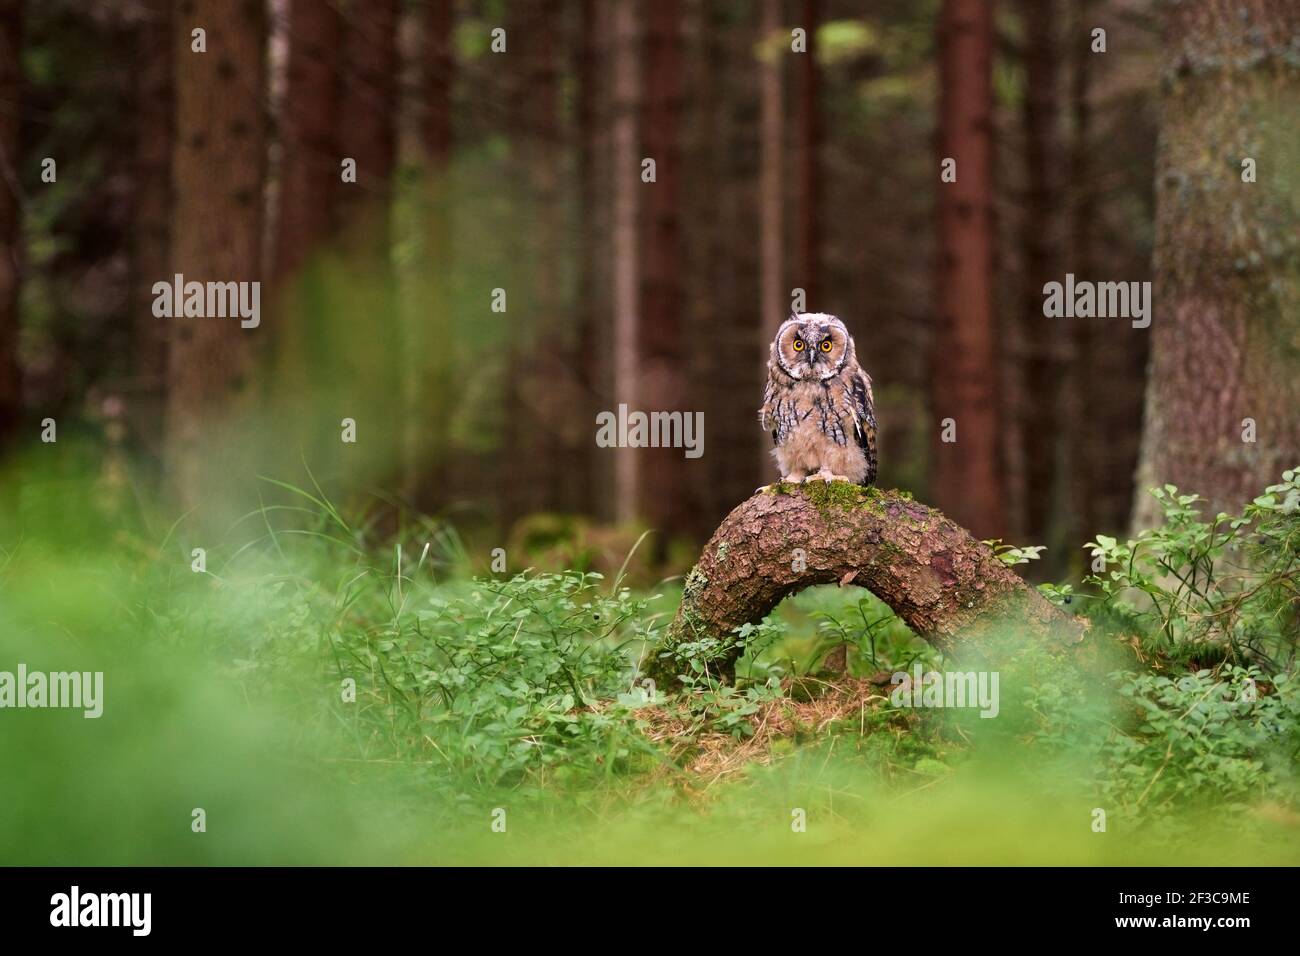 Owl in the Europe forest Stock Photo